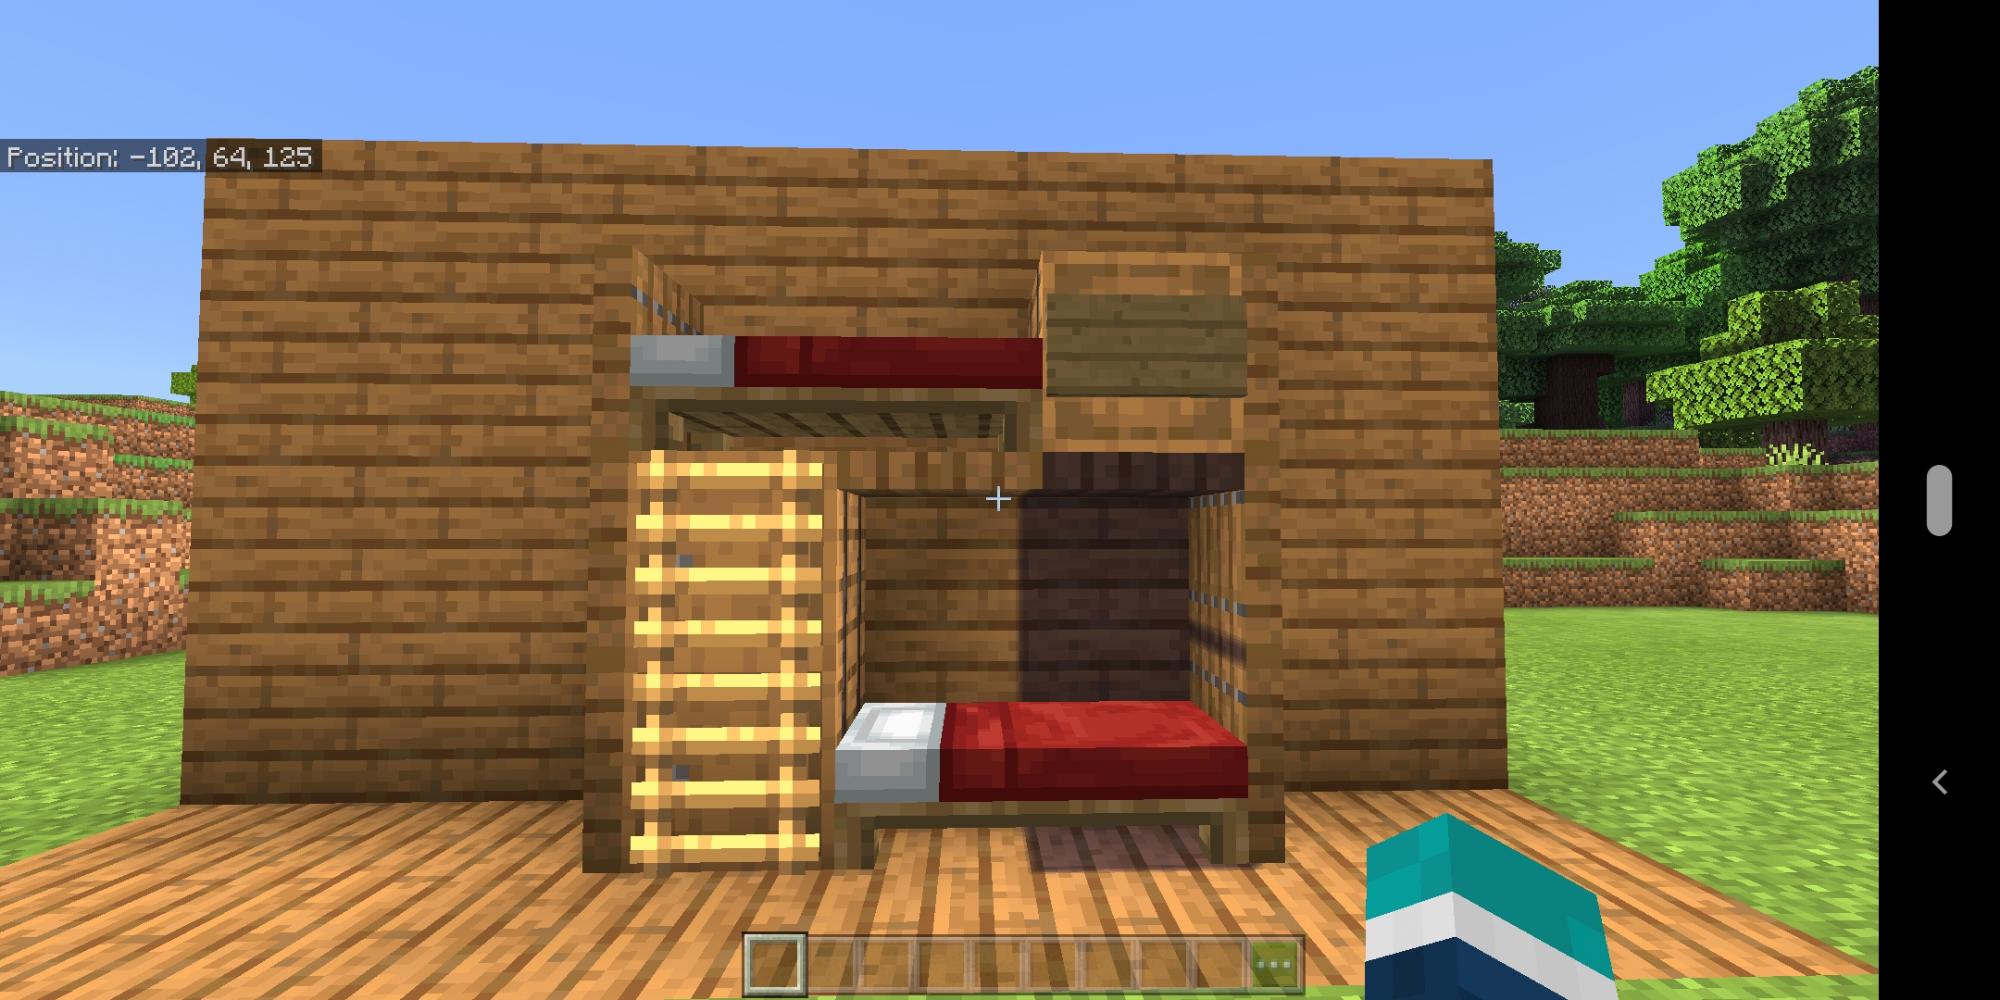 This Bunk Bed I Made Fandom, Can You Make A Bunk Bed In Minecraft